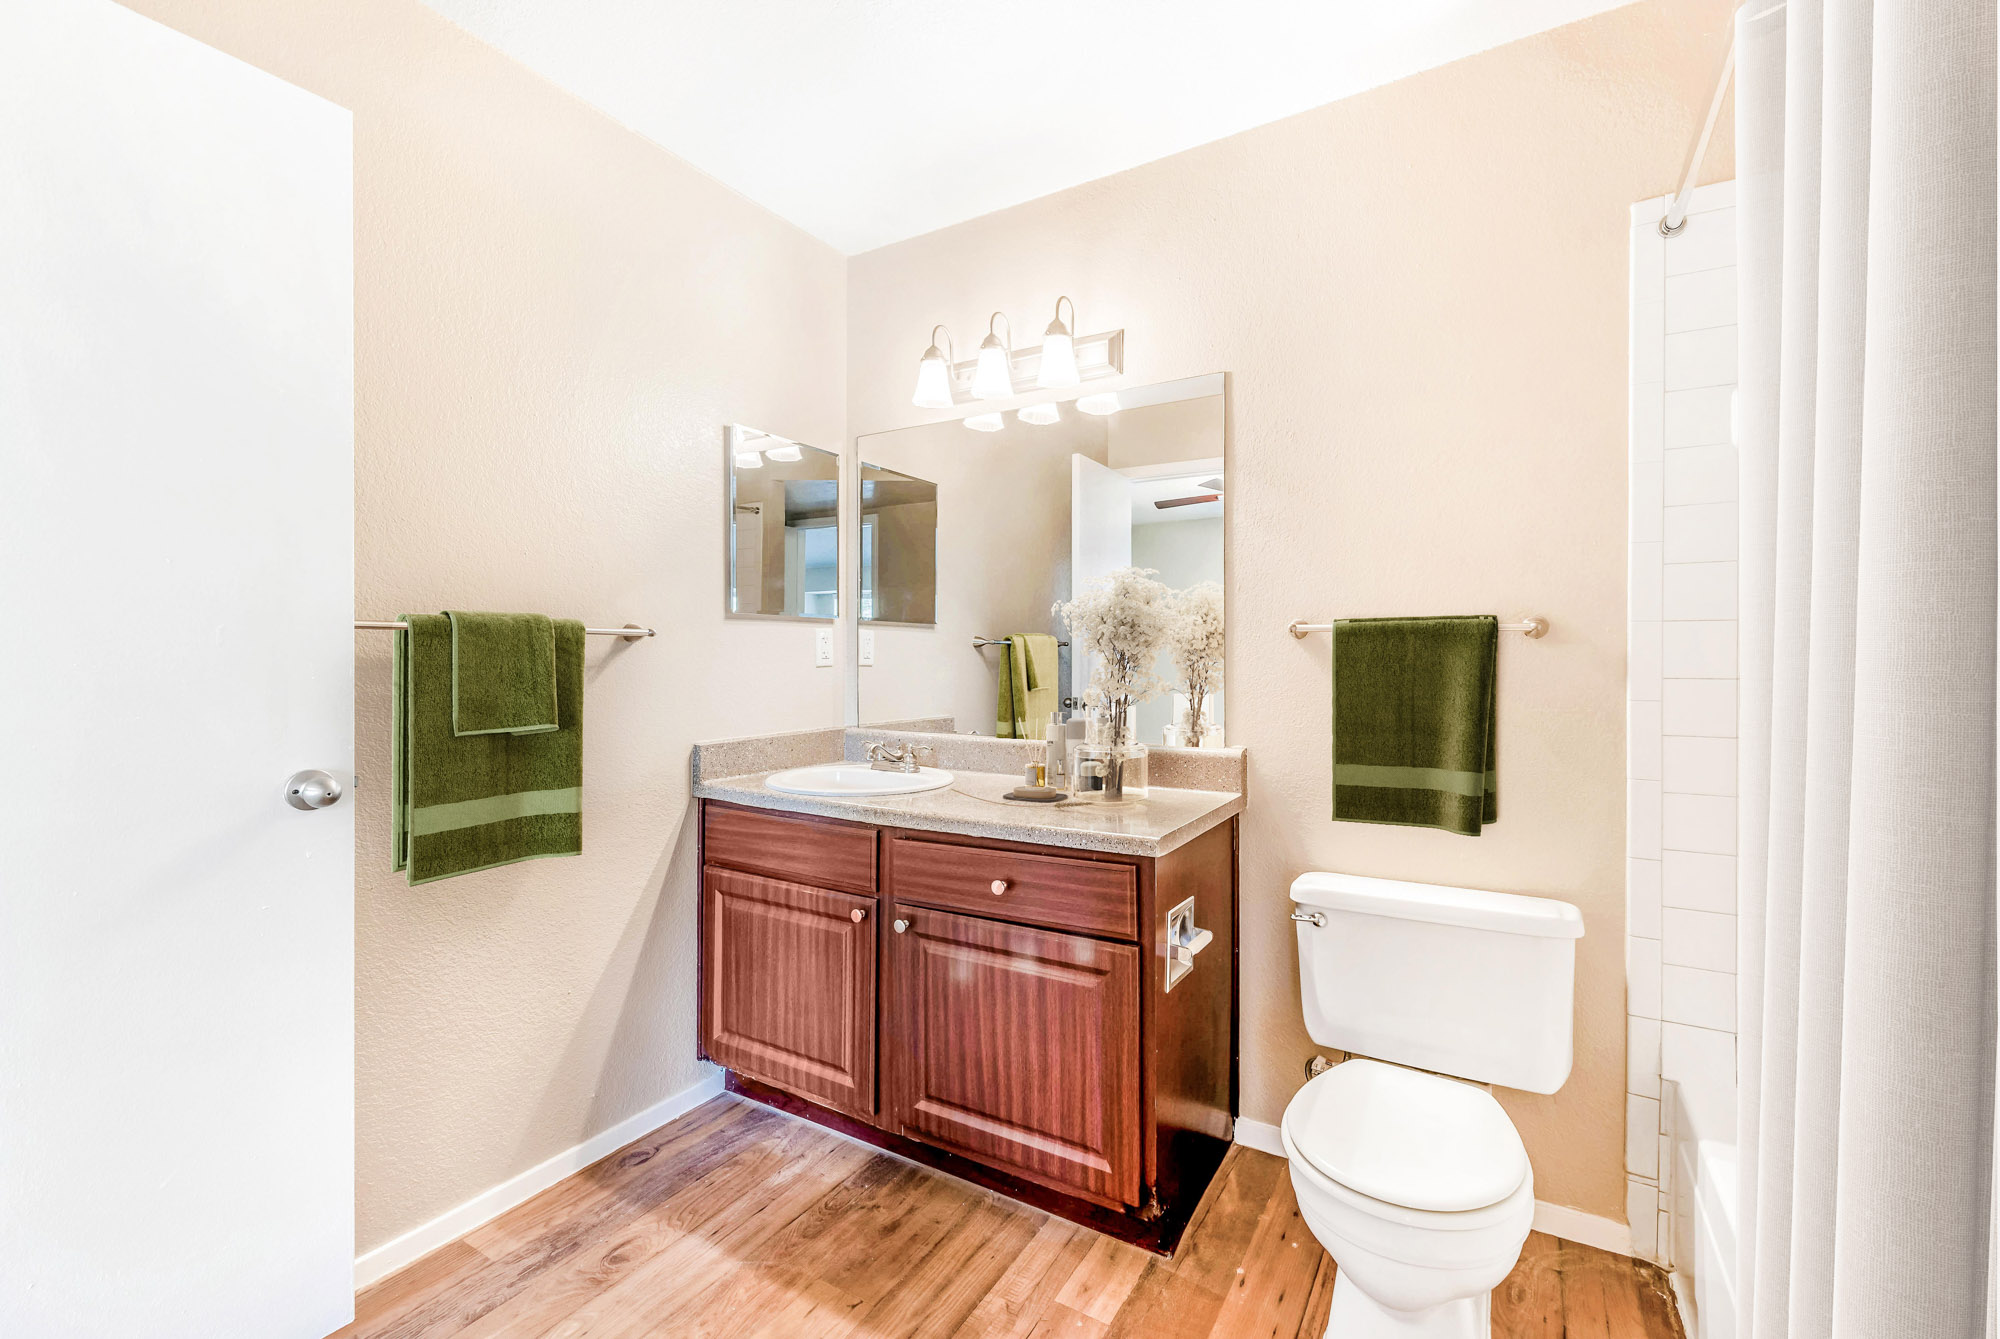 A bathroom at Canyon Chase apartments in Westminster, CO.